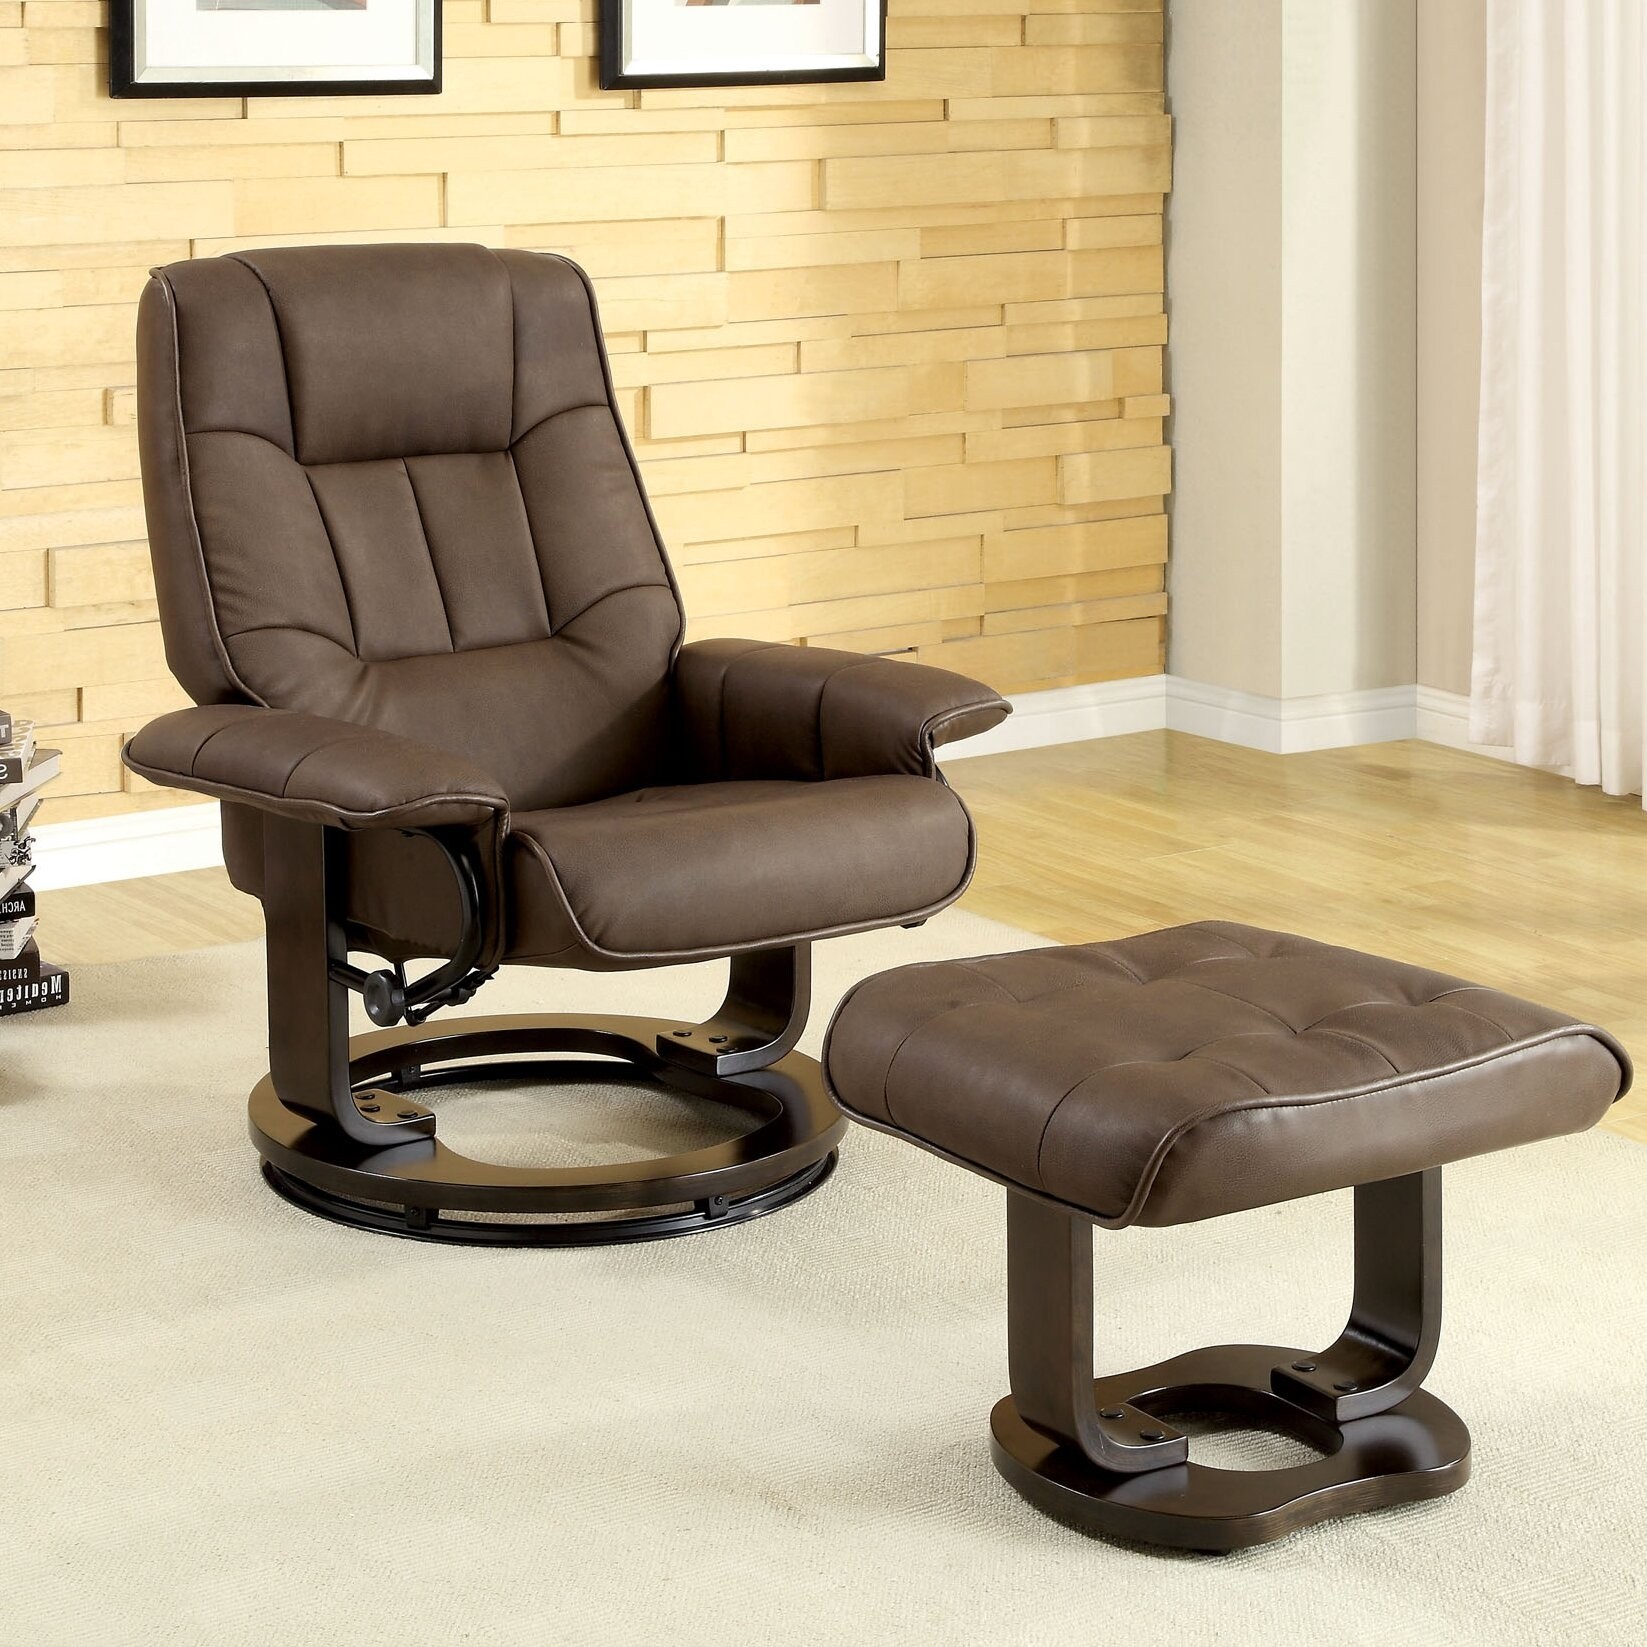 Hokku designs leatherette swivel recliner chair and